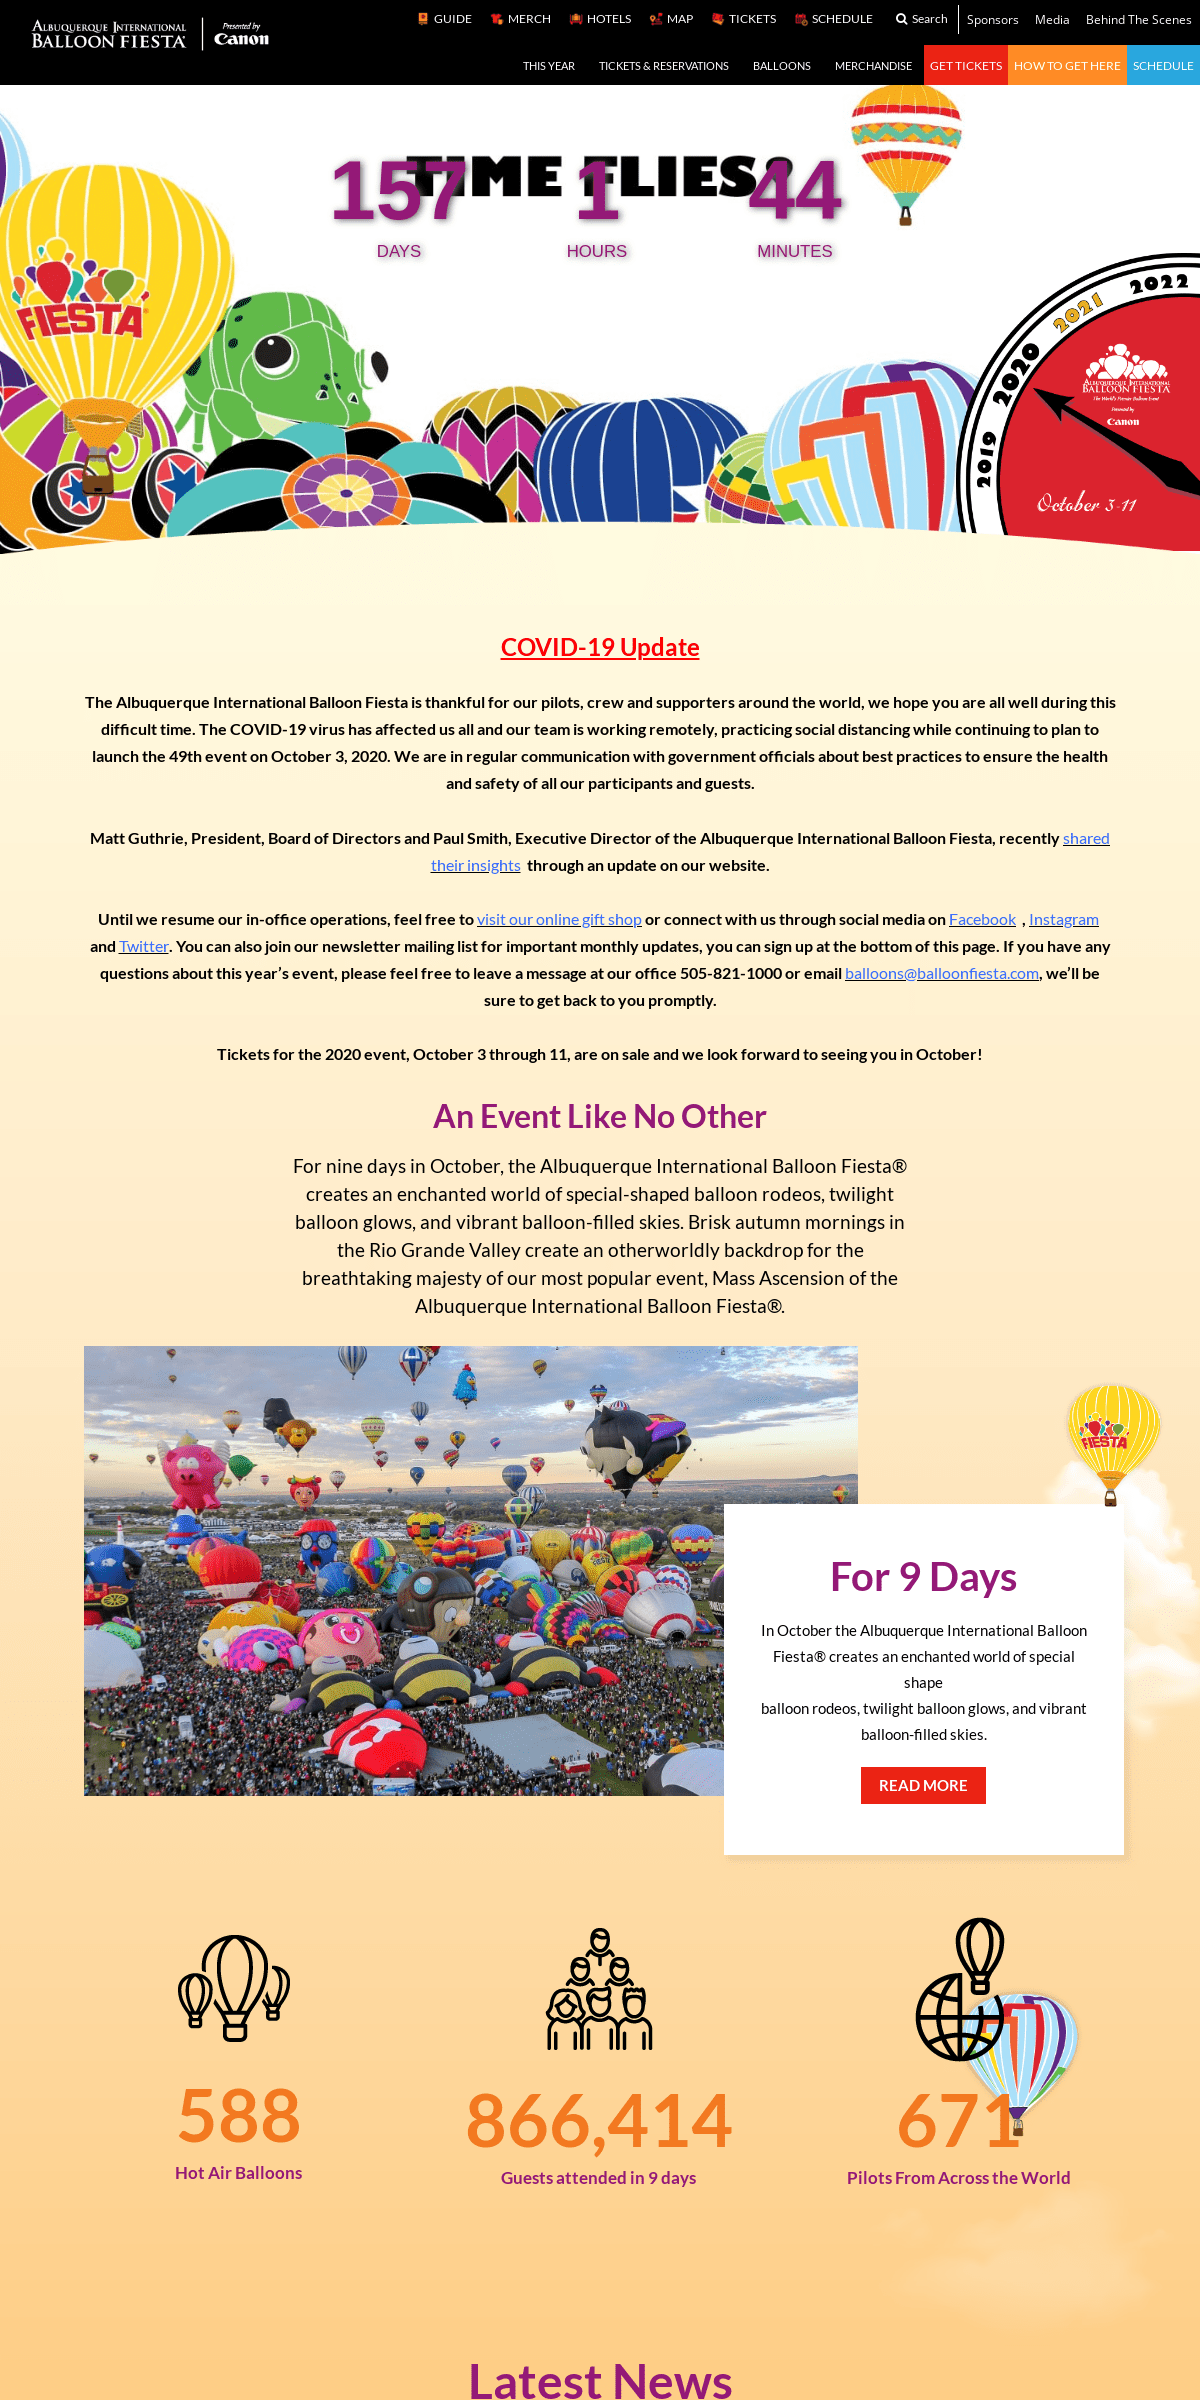 A complete backup of balloonfiesta.com